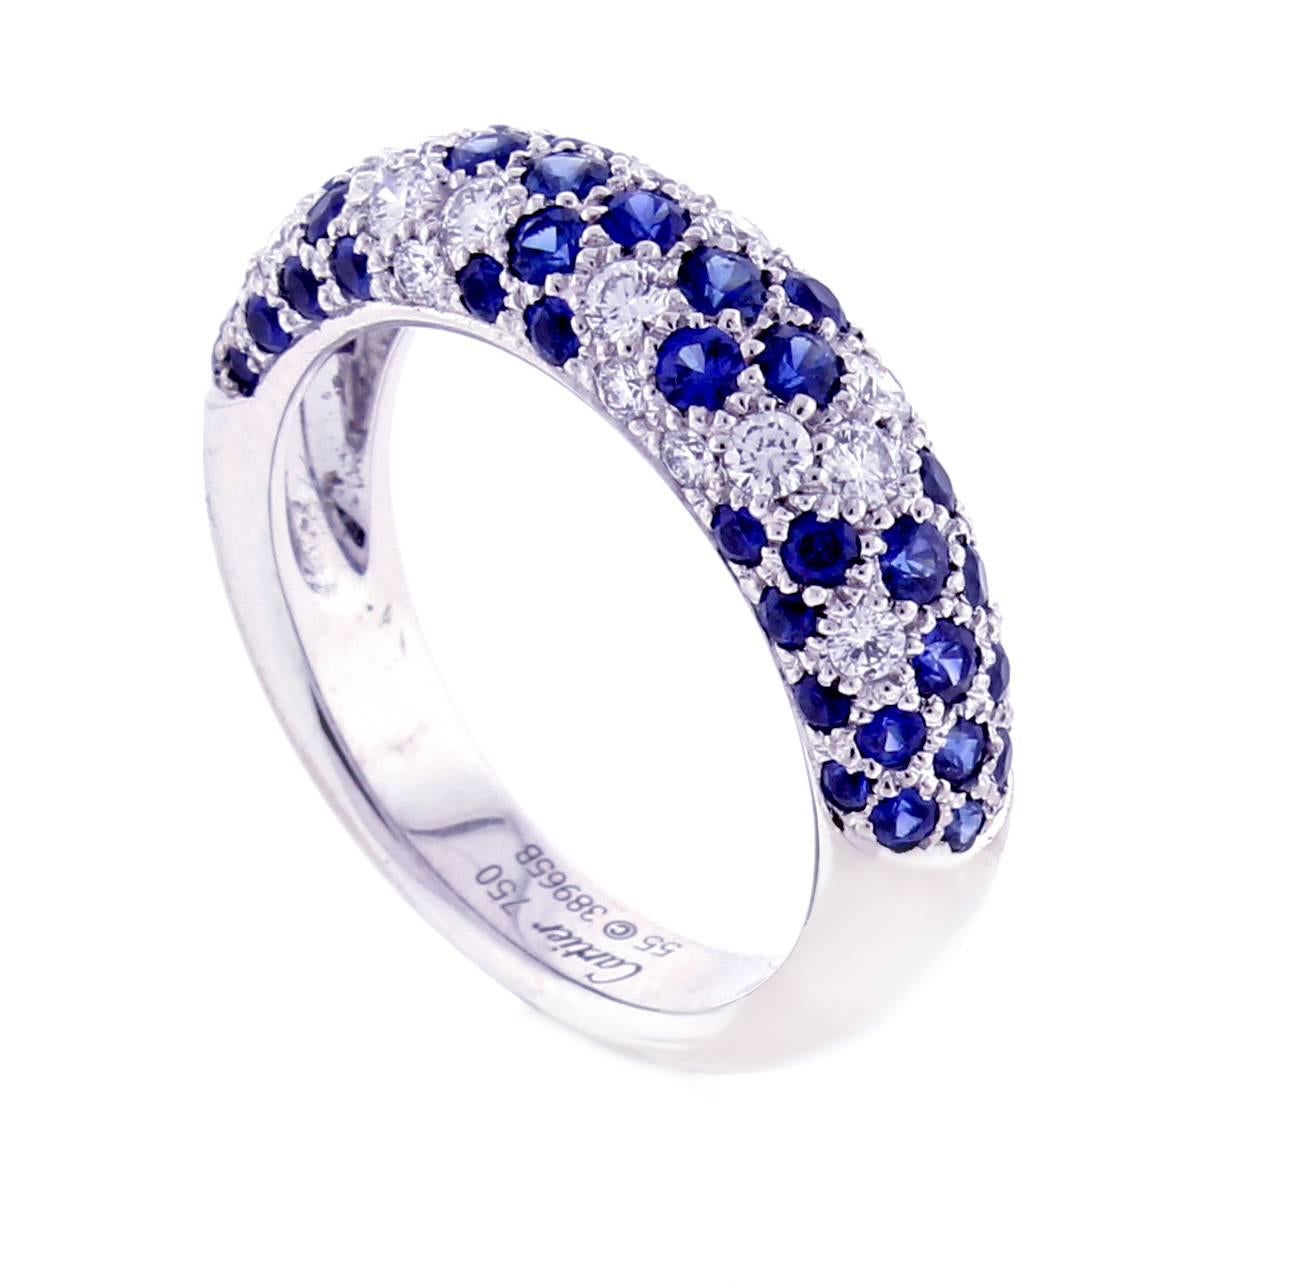 From Cartier, a vibrant sapphire and diamond 18 karat white band-ring. The ring is comprised of 50 blue round sapphires weighing approximately 2 carats and 19 brilliant cut diamonds weighing approximately .60 carats. The ring tappers from 6mm (¼